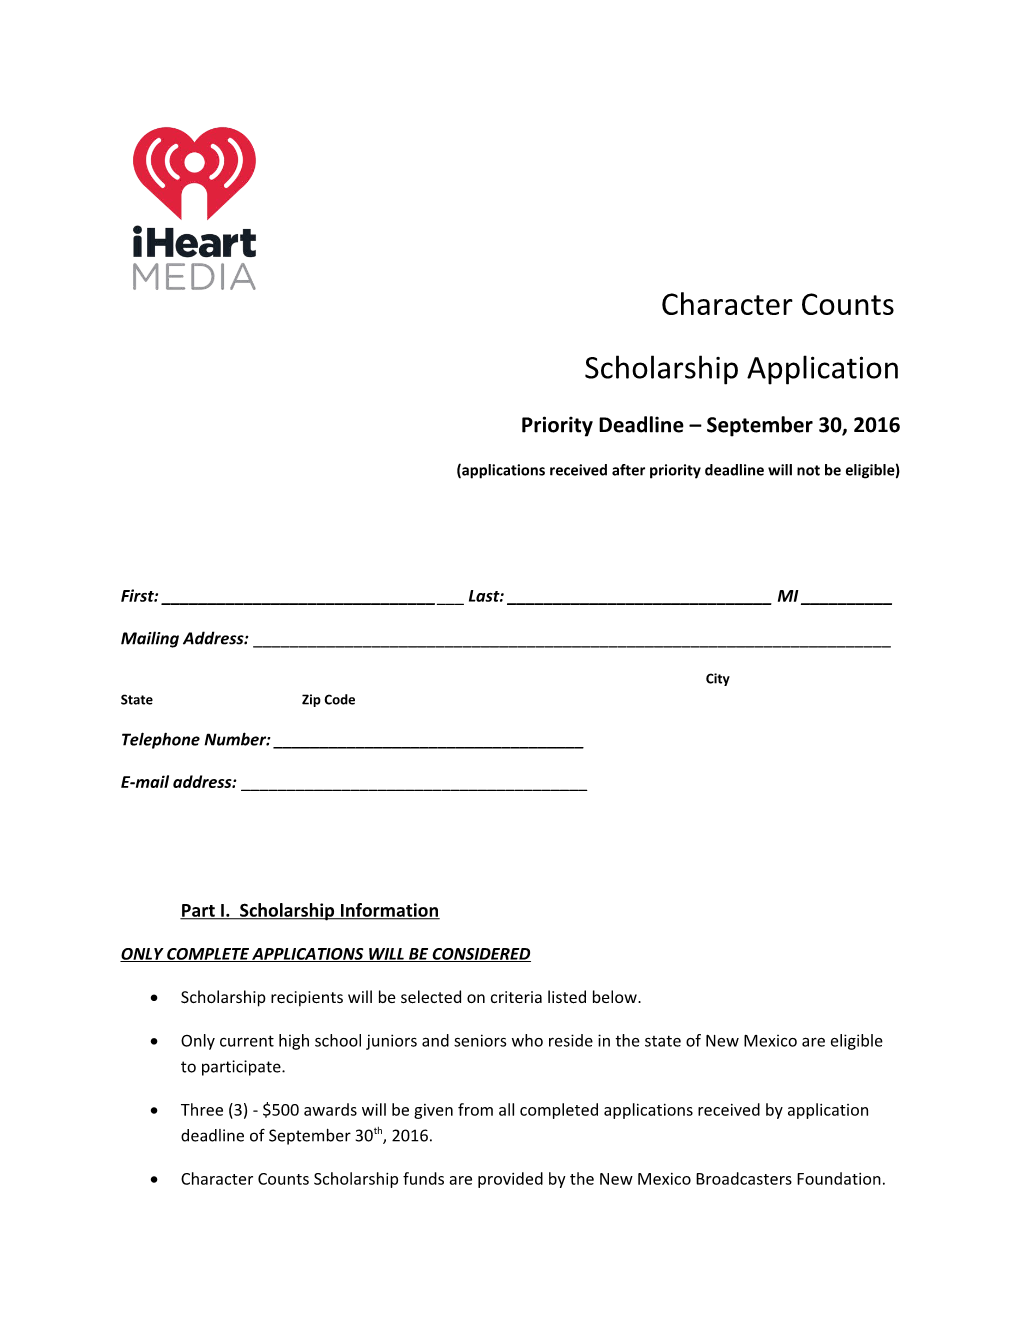 Applications Received After Priority Deadline Will Not Be Eligible